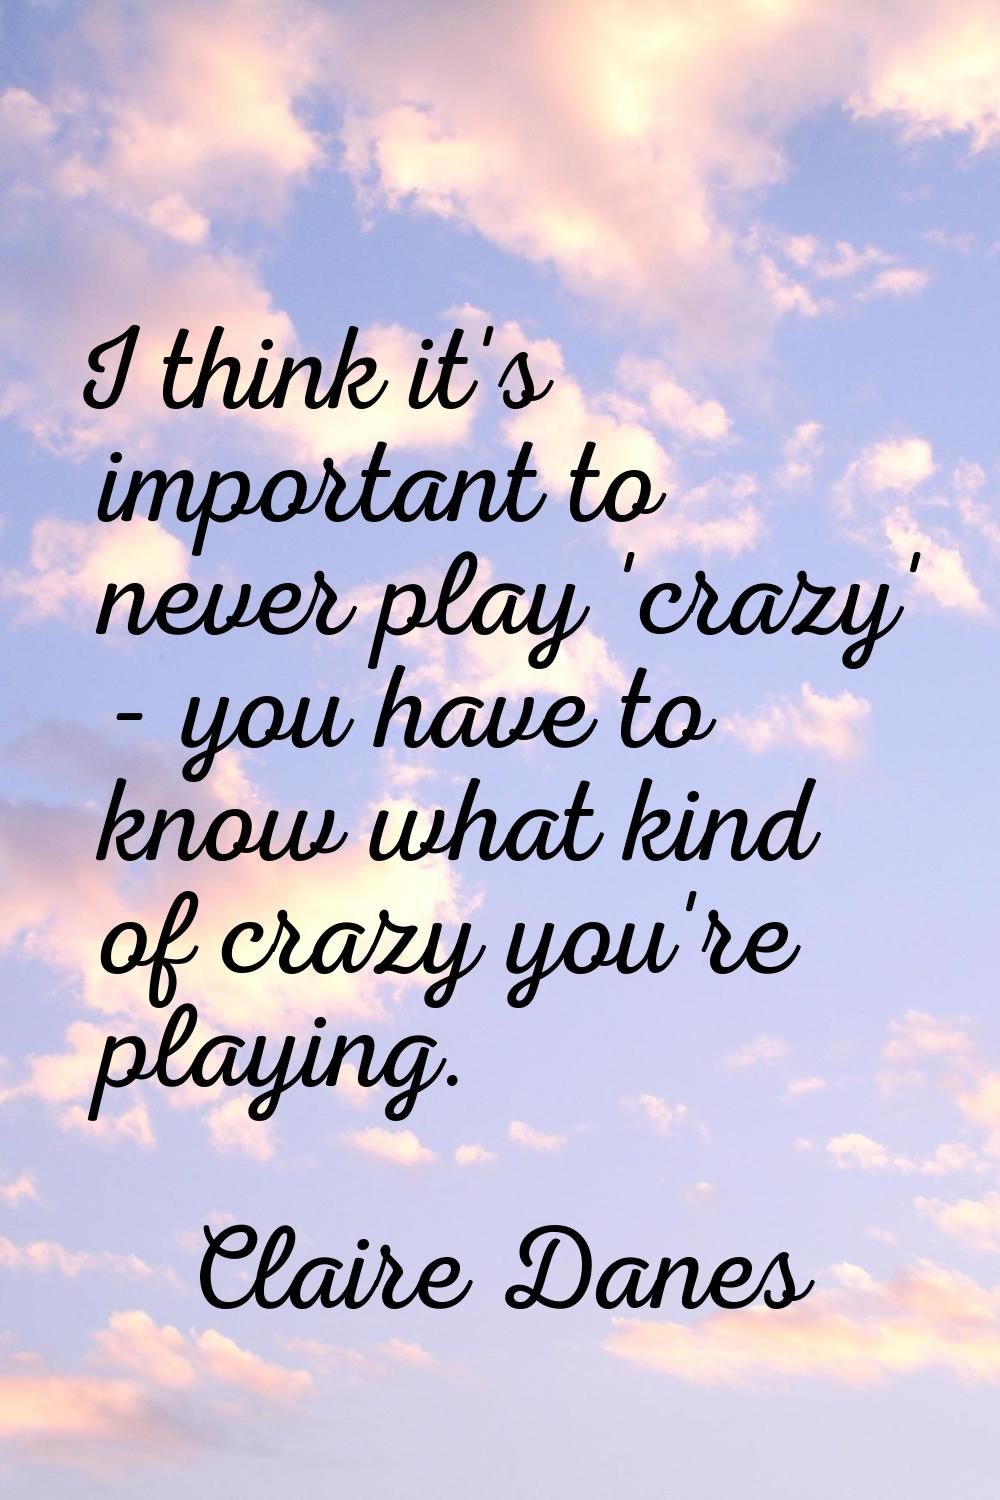 I think it's important to never play 'crazy' - you have to know what kind of crazy you're playing.